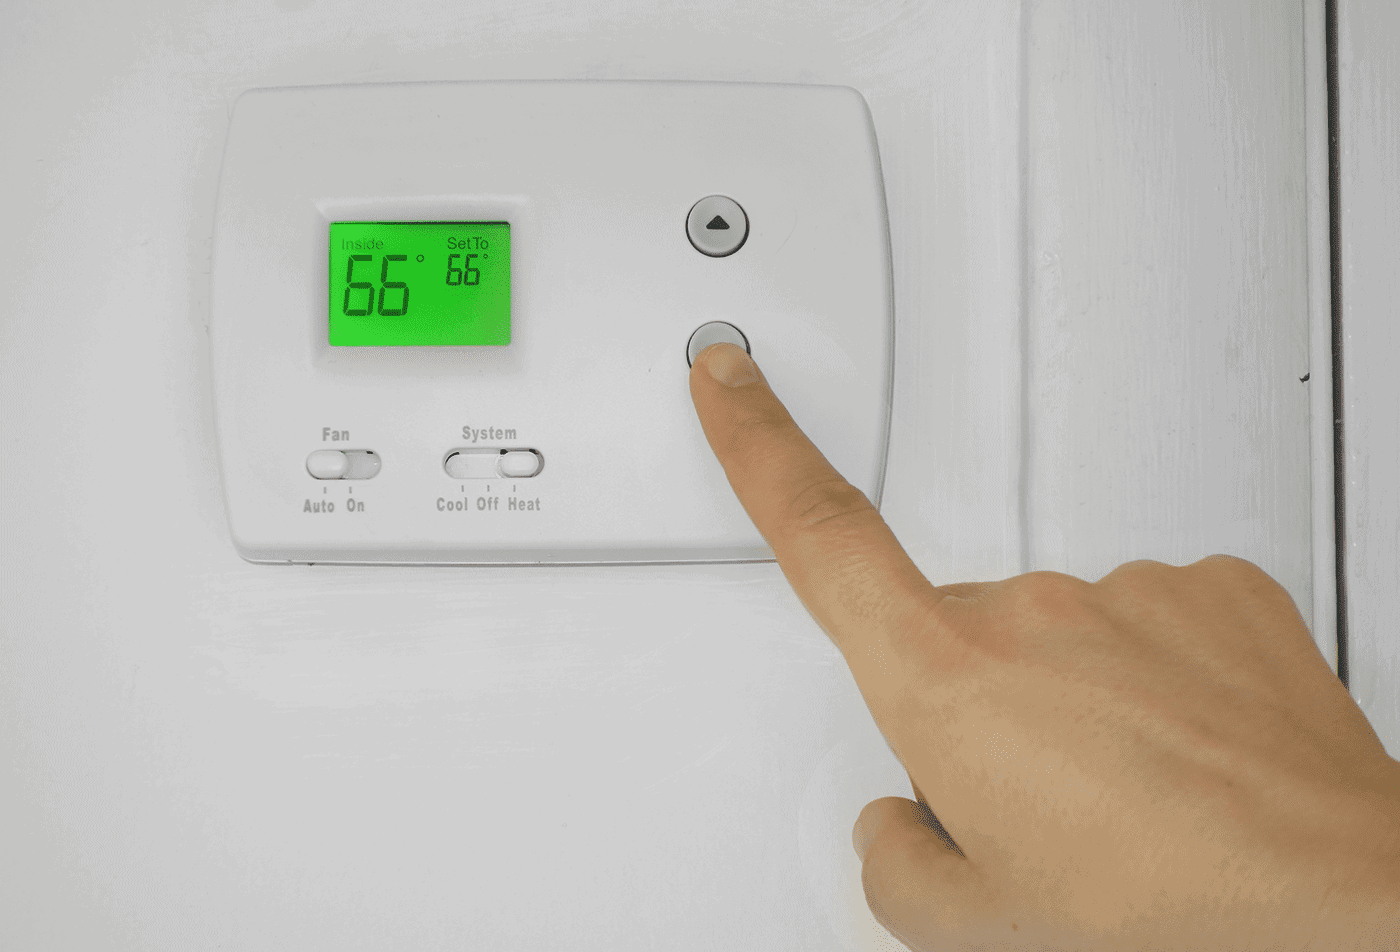 Keep thermostats low while not breaking your budget.